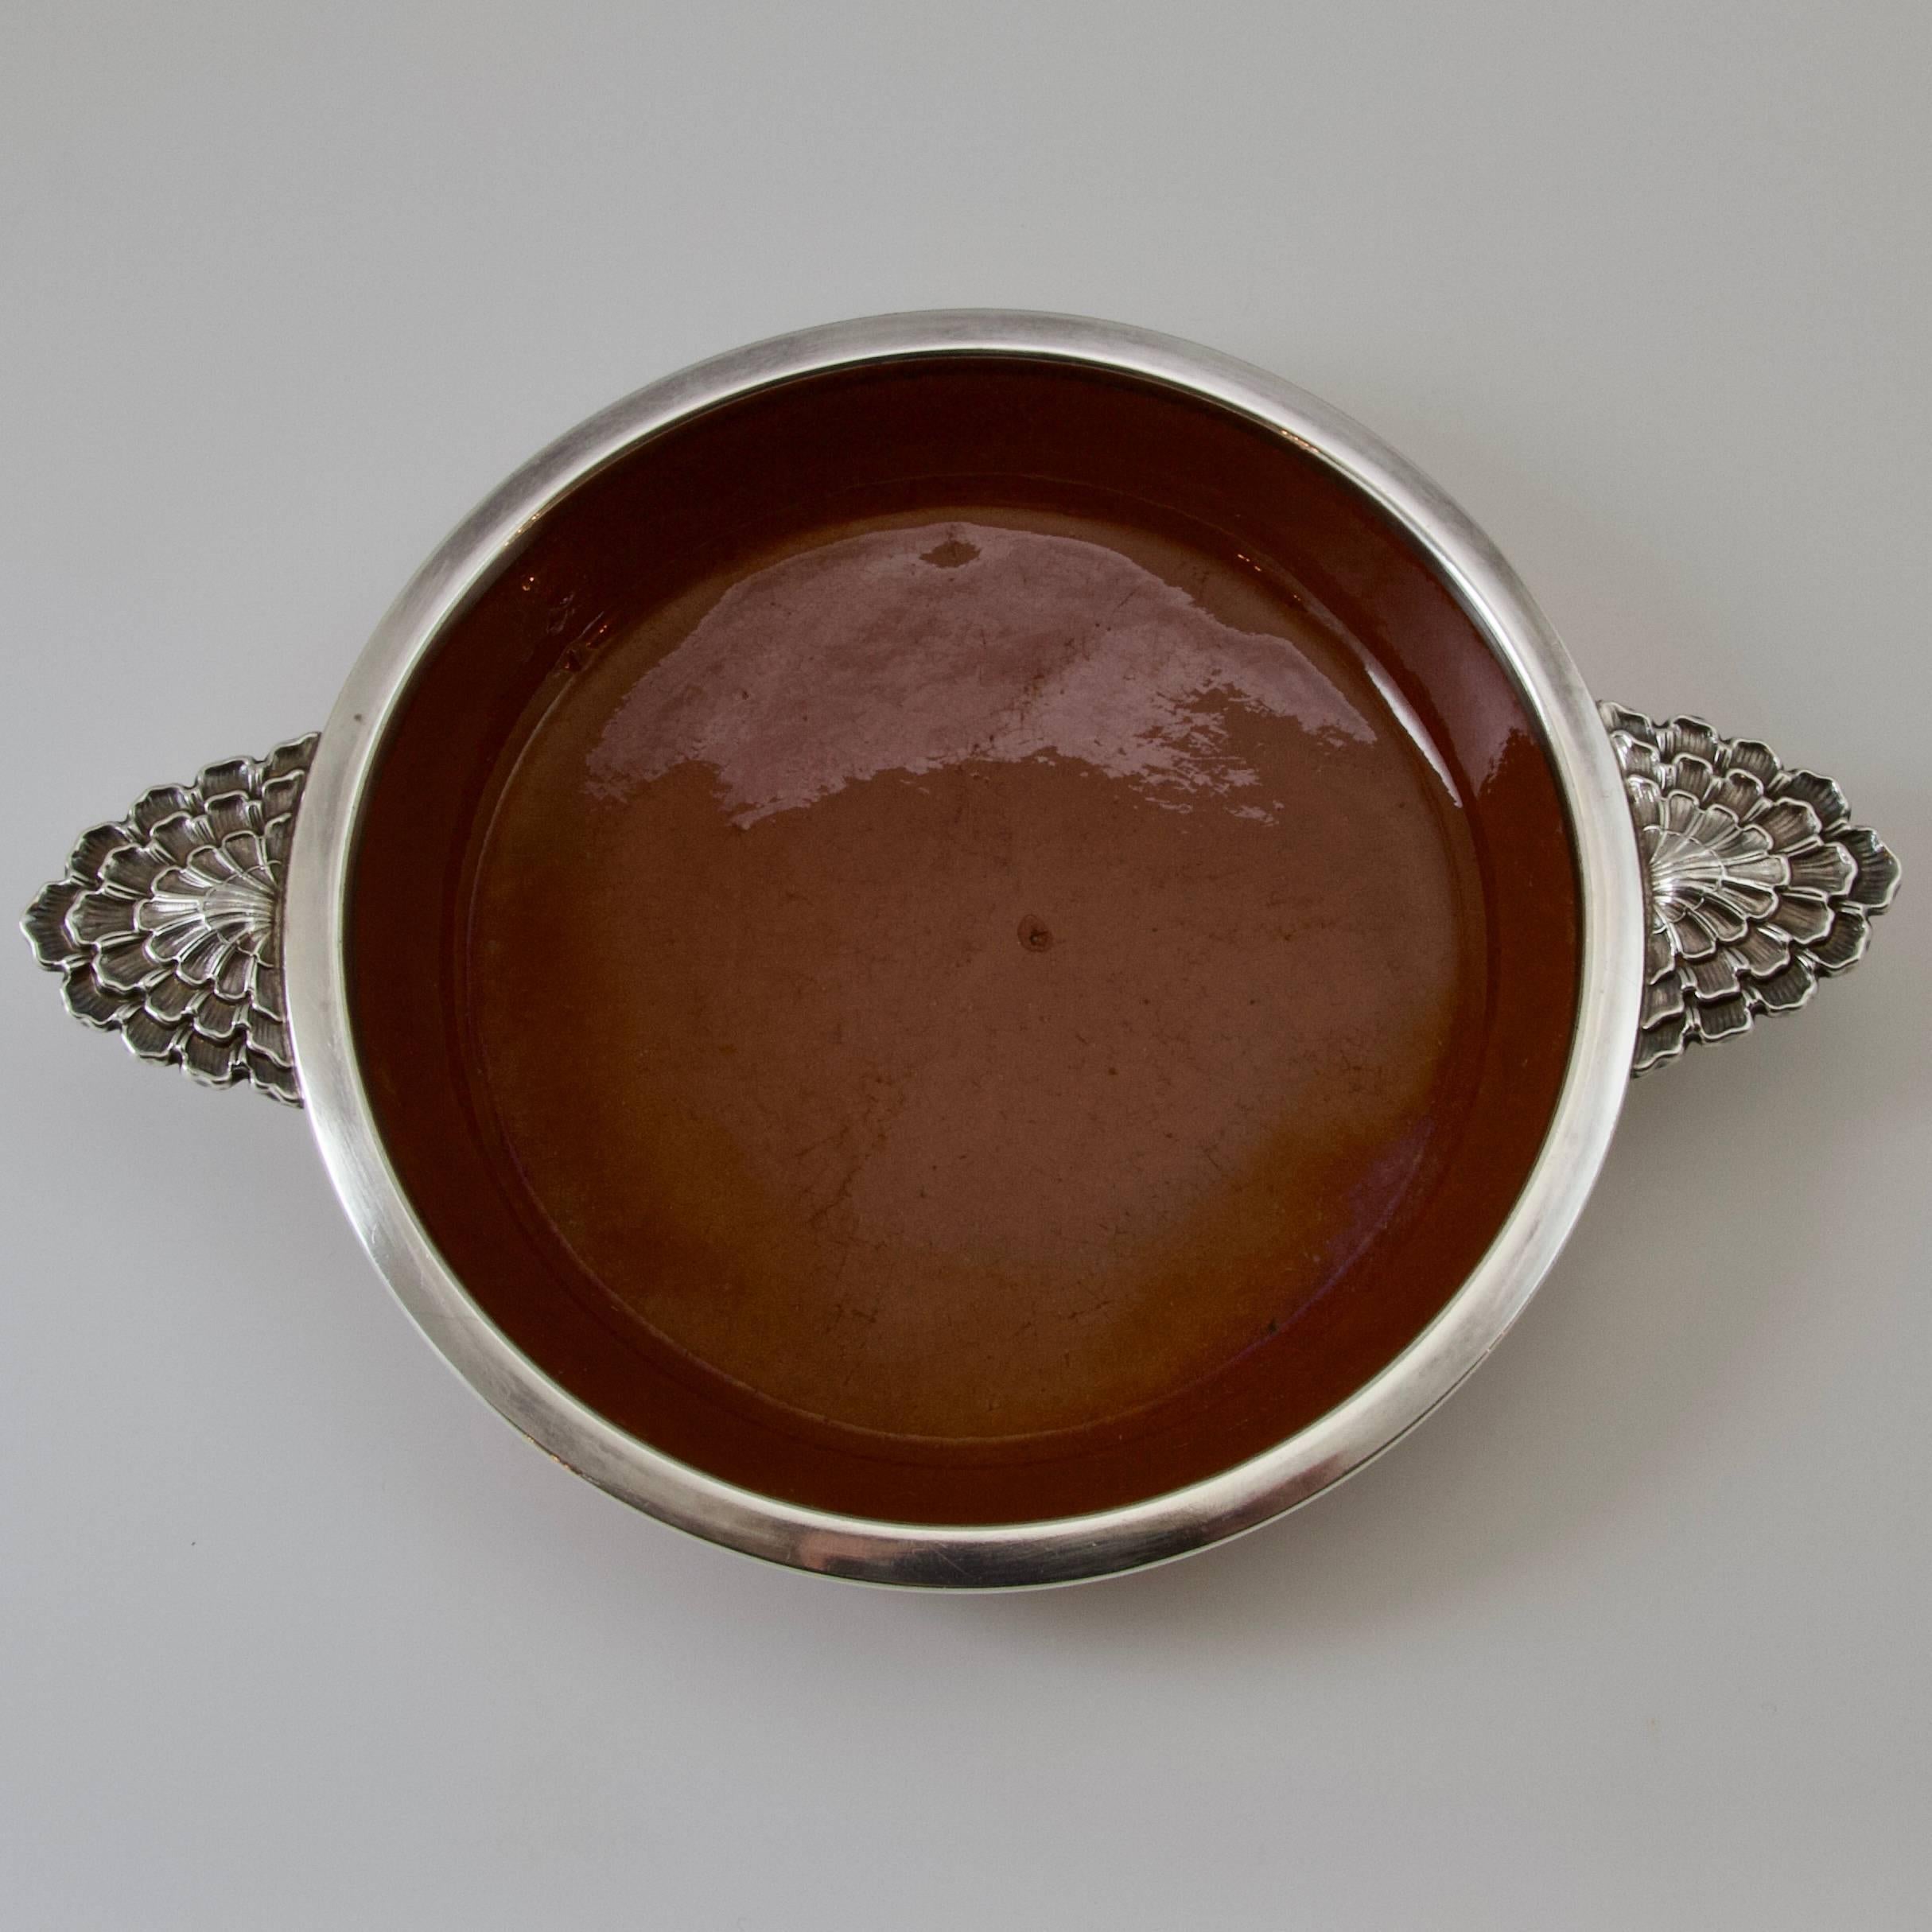 A rare and in very good condition sterling silver and terracota plate (for Creme Caramel)
Terracota glazed inside and natural on the reverse.
Circled by a large silver sterling frame. Two handles in molded and chiseled silver sterling look like